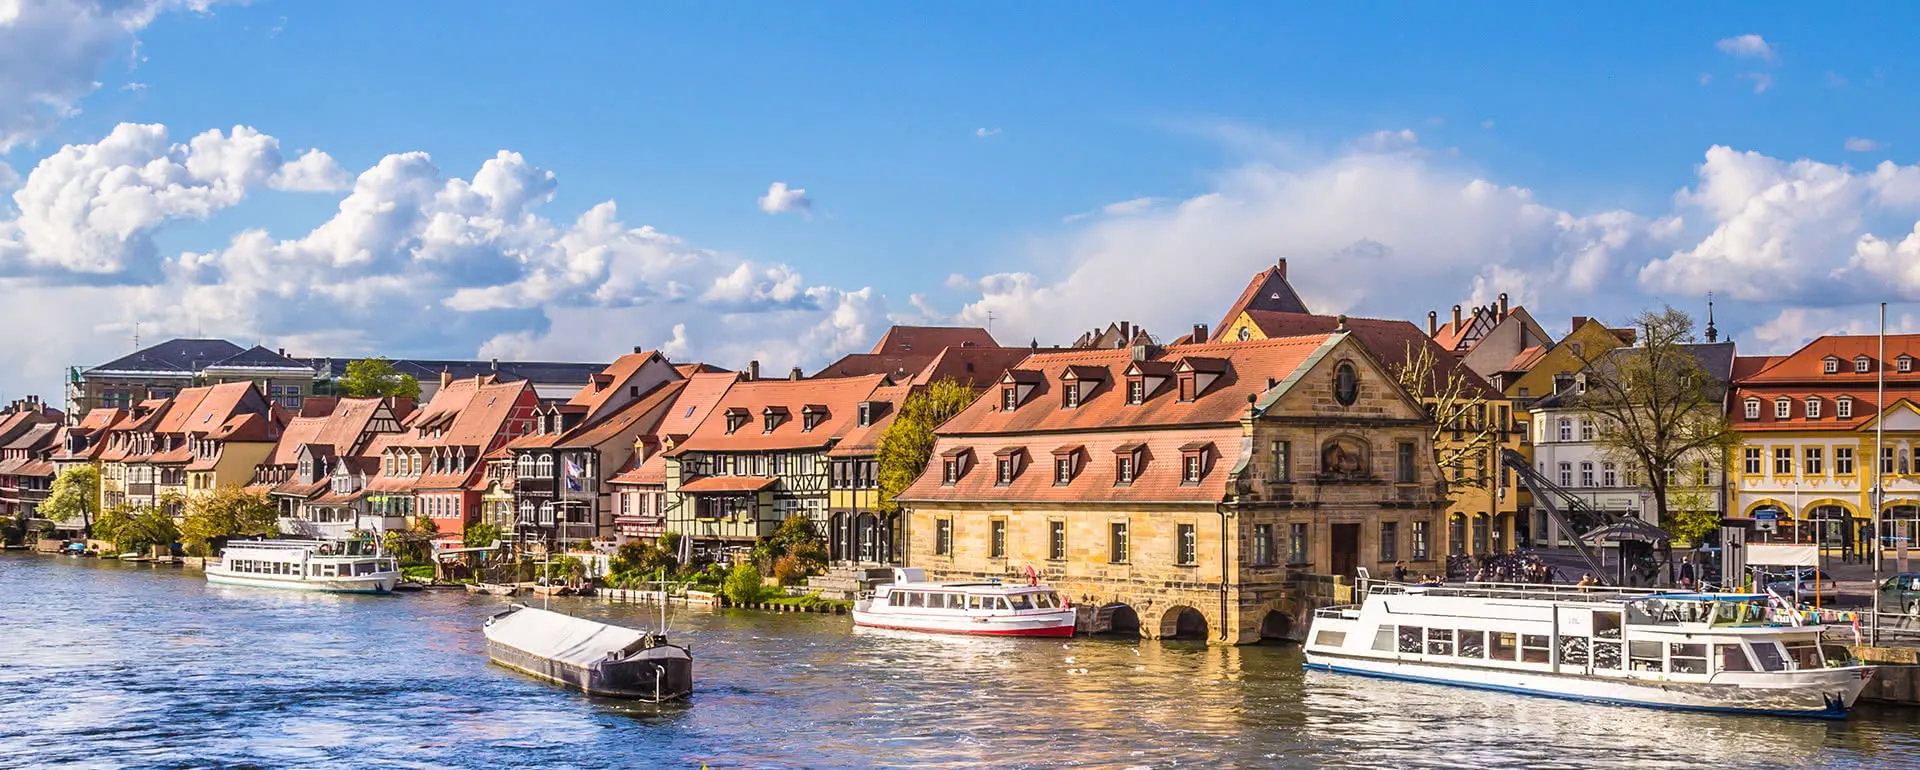 Bamberg - the destination with youth hostels